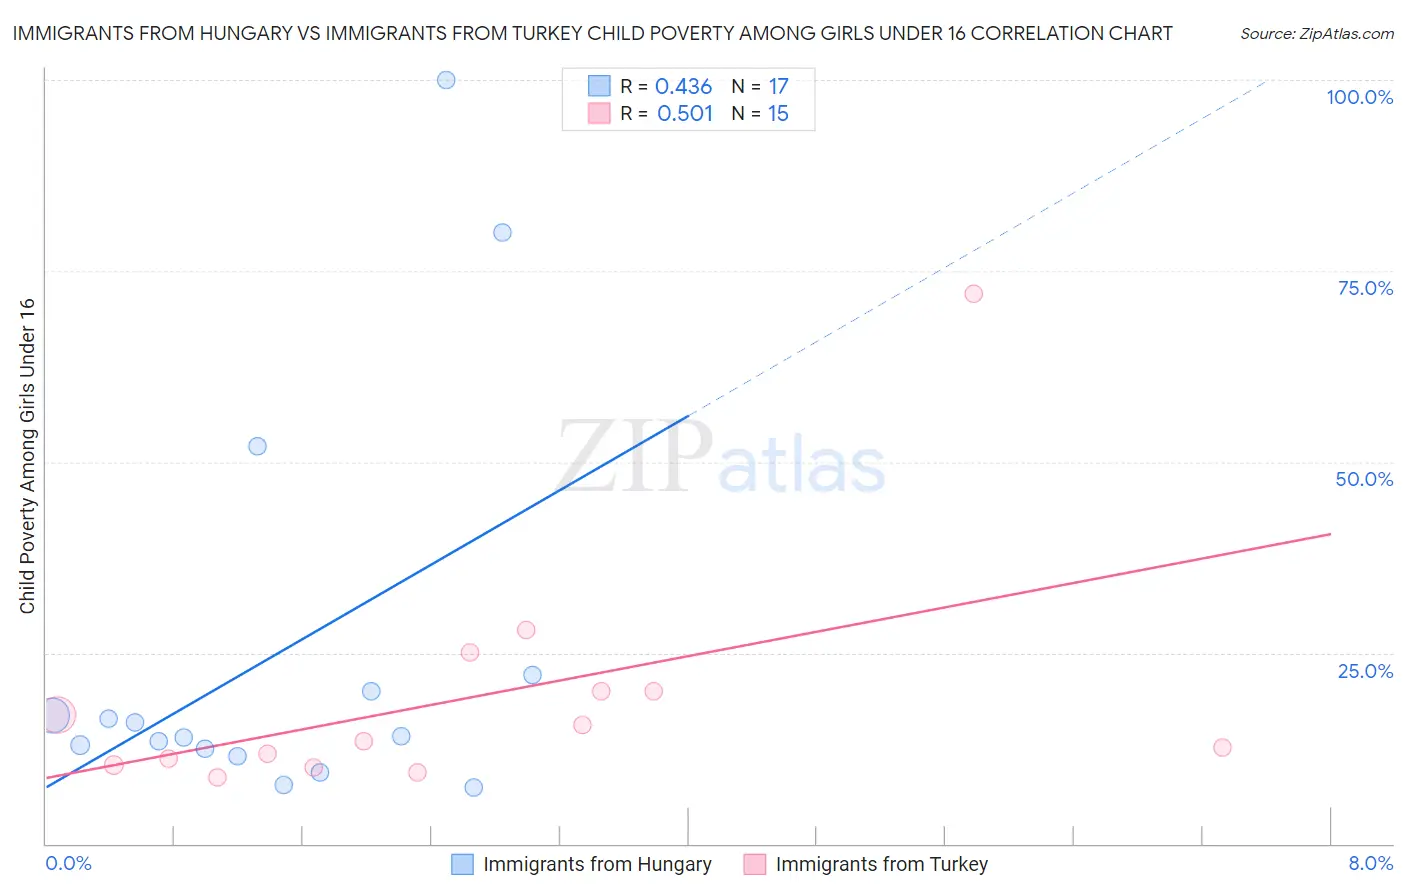 Immigrants from Hungary vs Immigrants from Turkey Child Poverty Among Girls Under 16